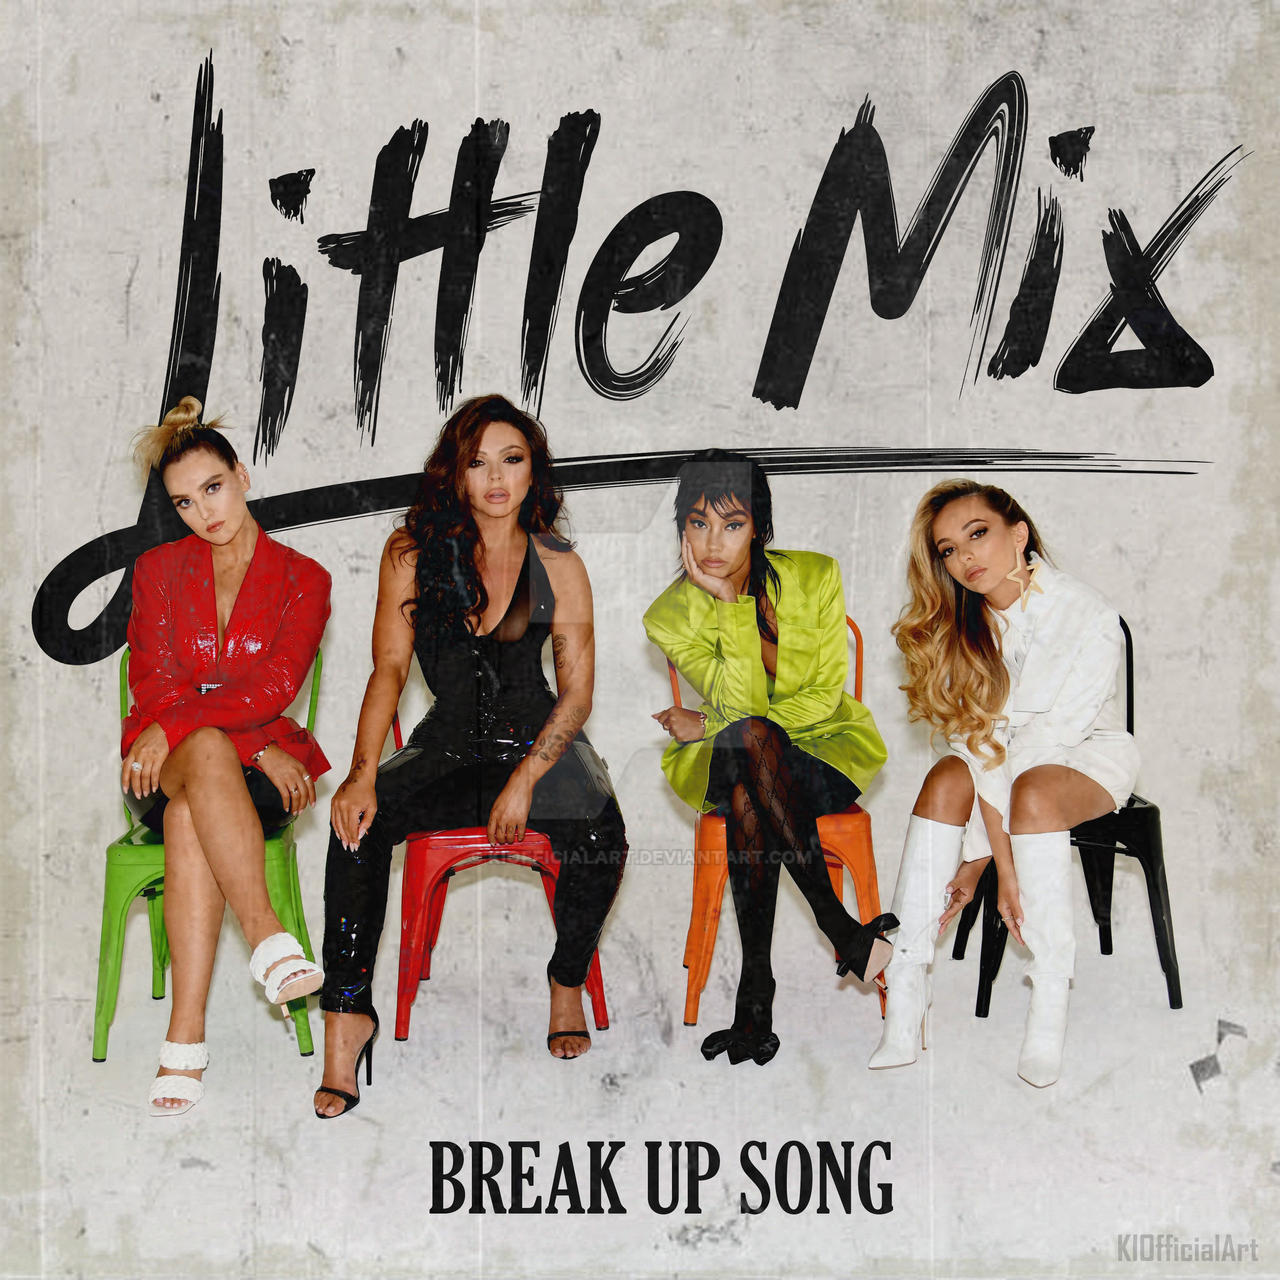 Little Mix Break Up Song (Alternative Cover) by KIOfficialArt on